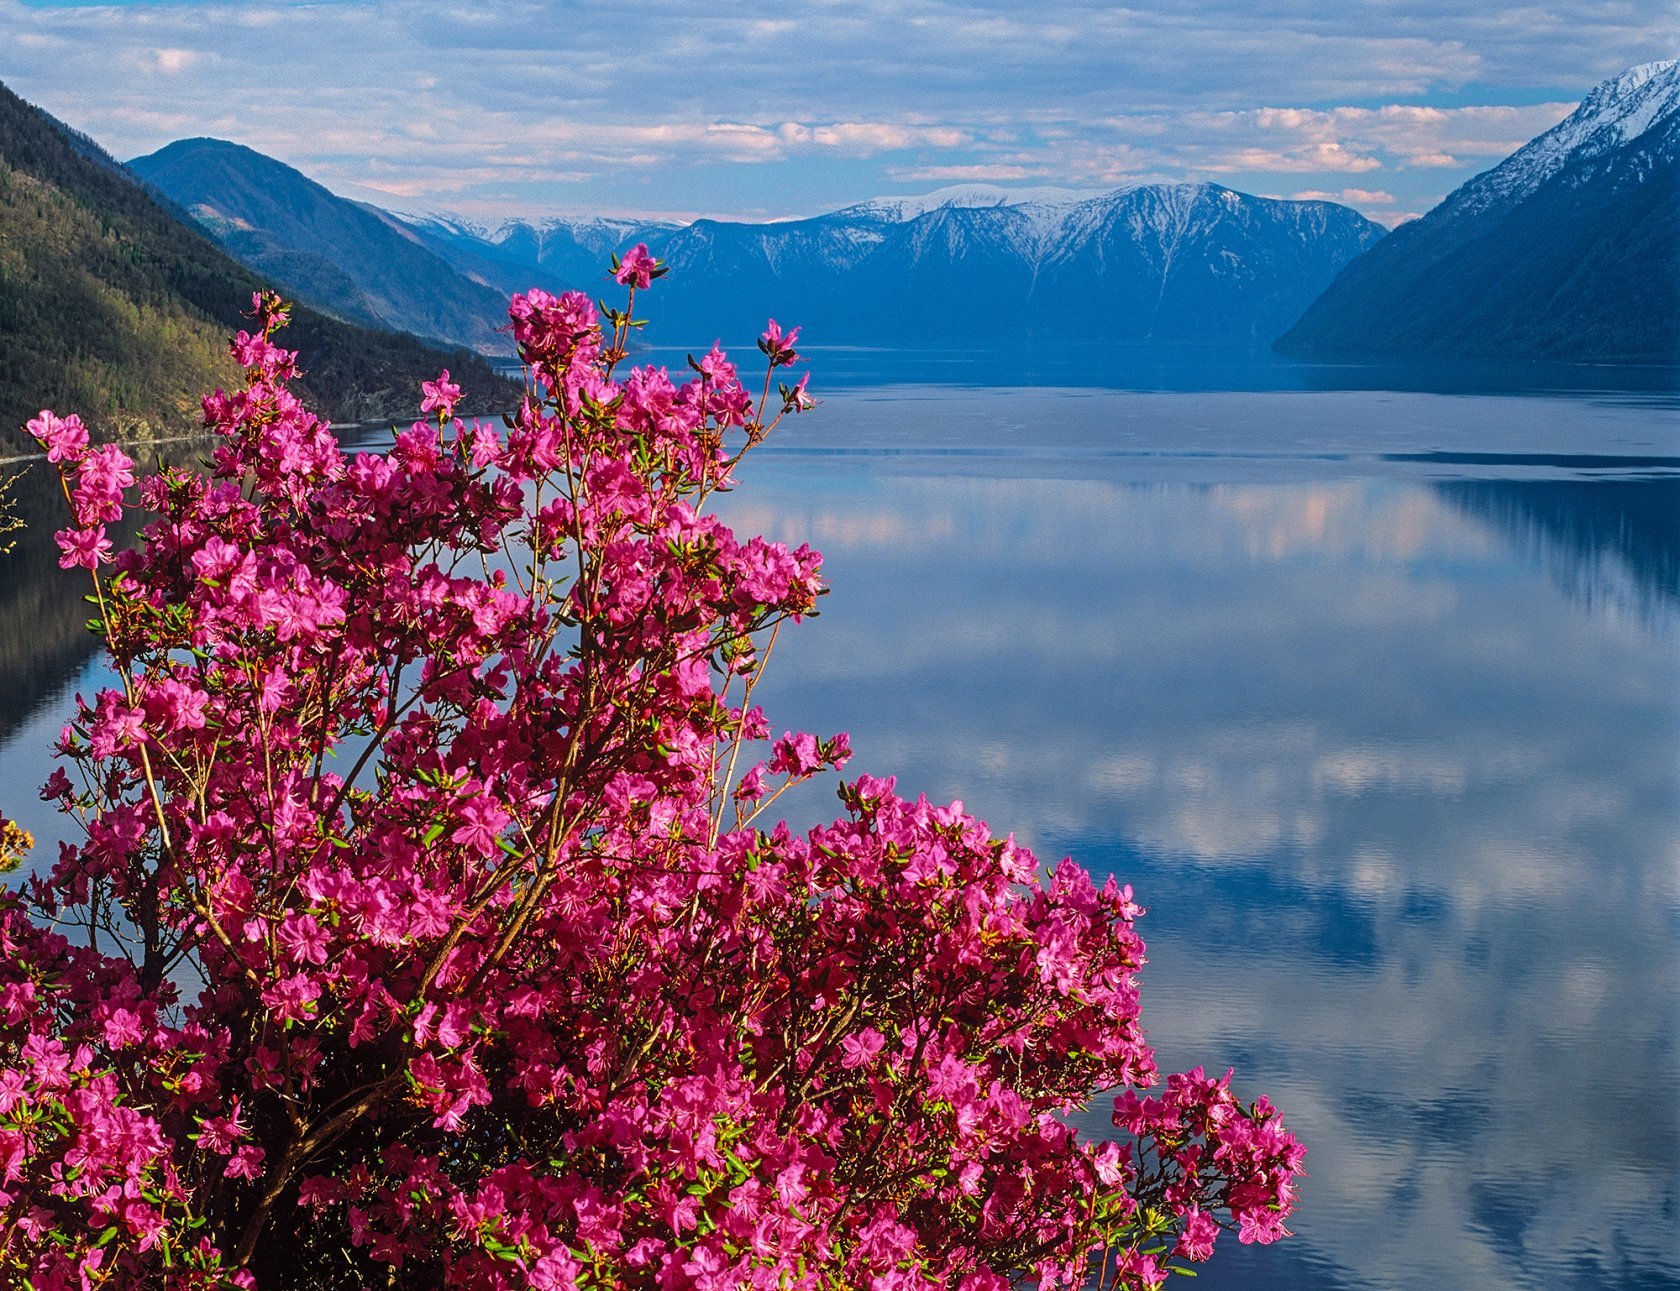 a pink flowers on a bush next to a body of water